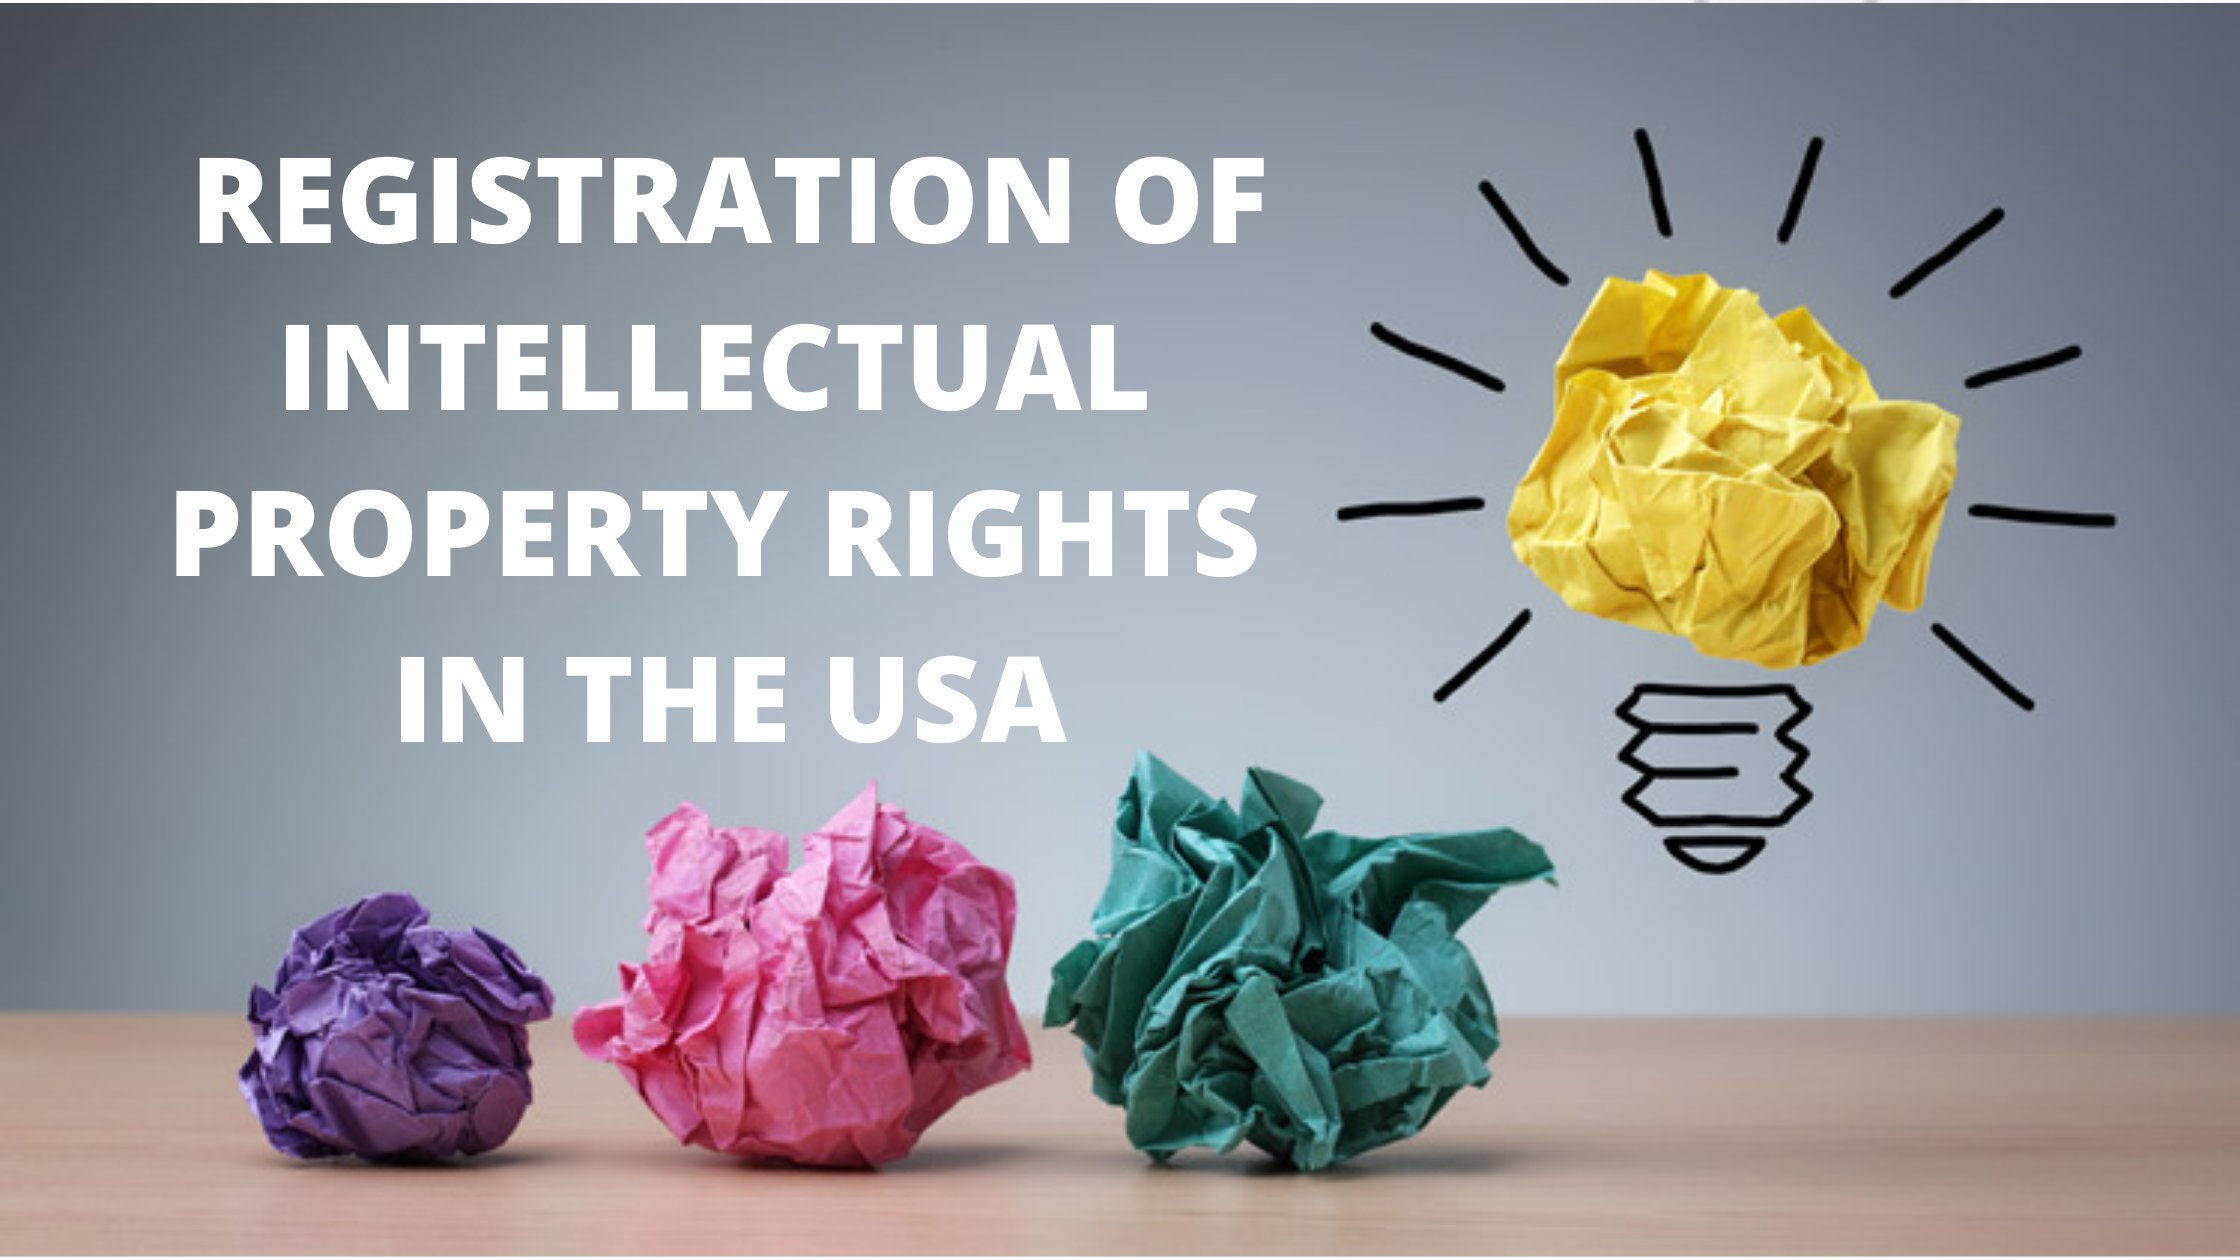 Registration of Intellectual Property Rights in the USA